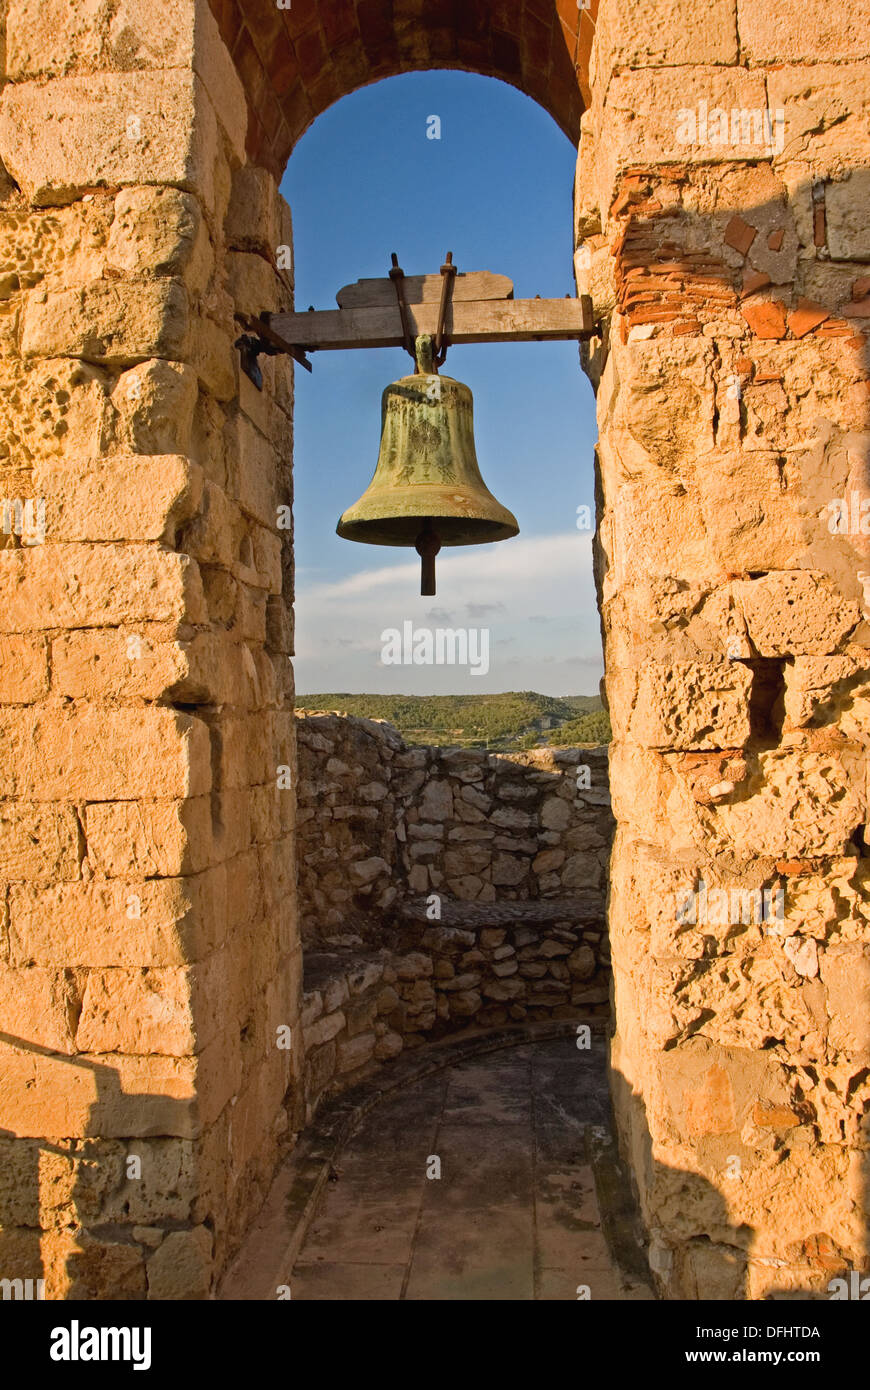 Old bell tower and bell hanging in the medieval castle Santa Creu, in Calafell, Spain. Stock Photo